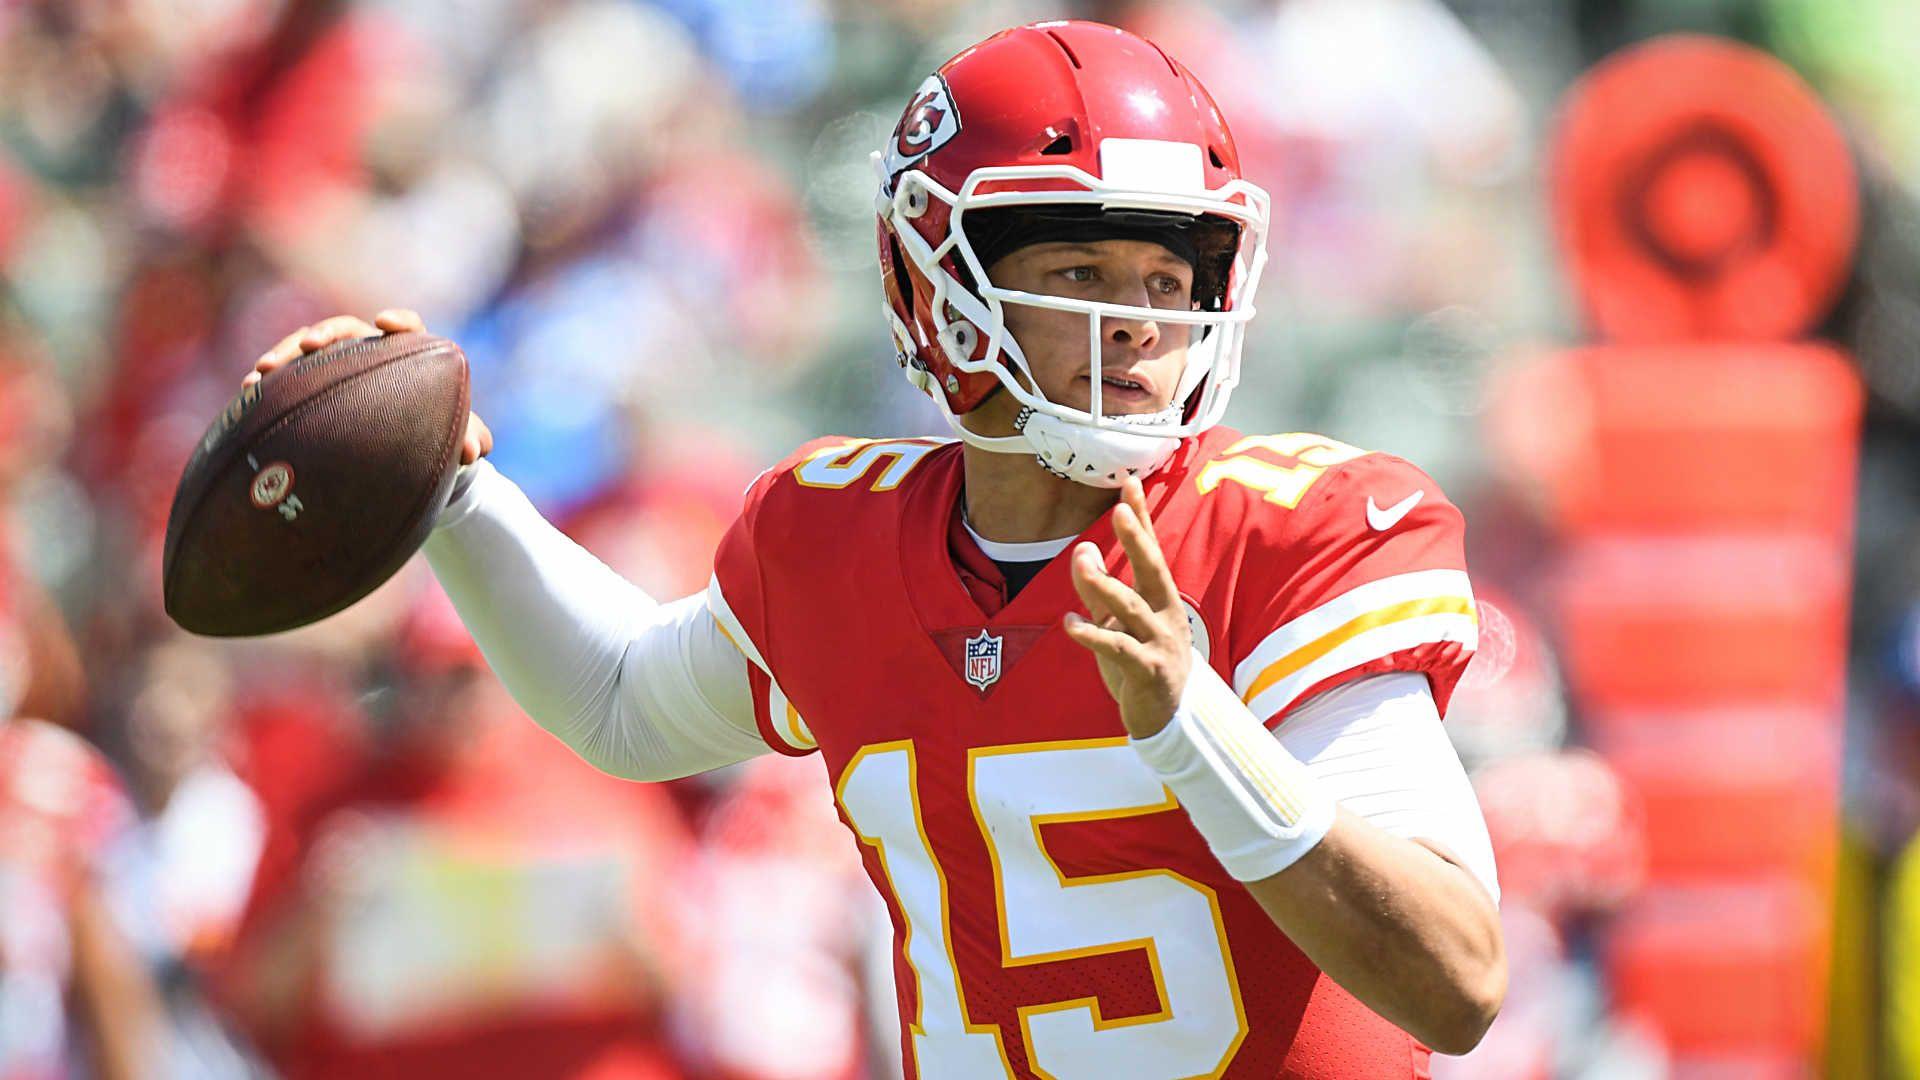 NFL overreactions from Week 1: Mahomes for MVP, 49ers are frauds